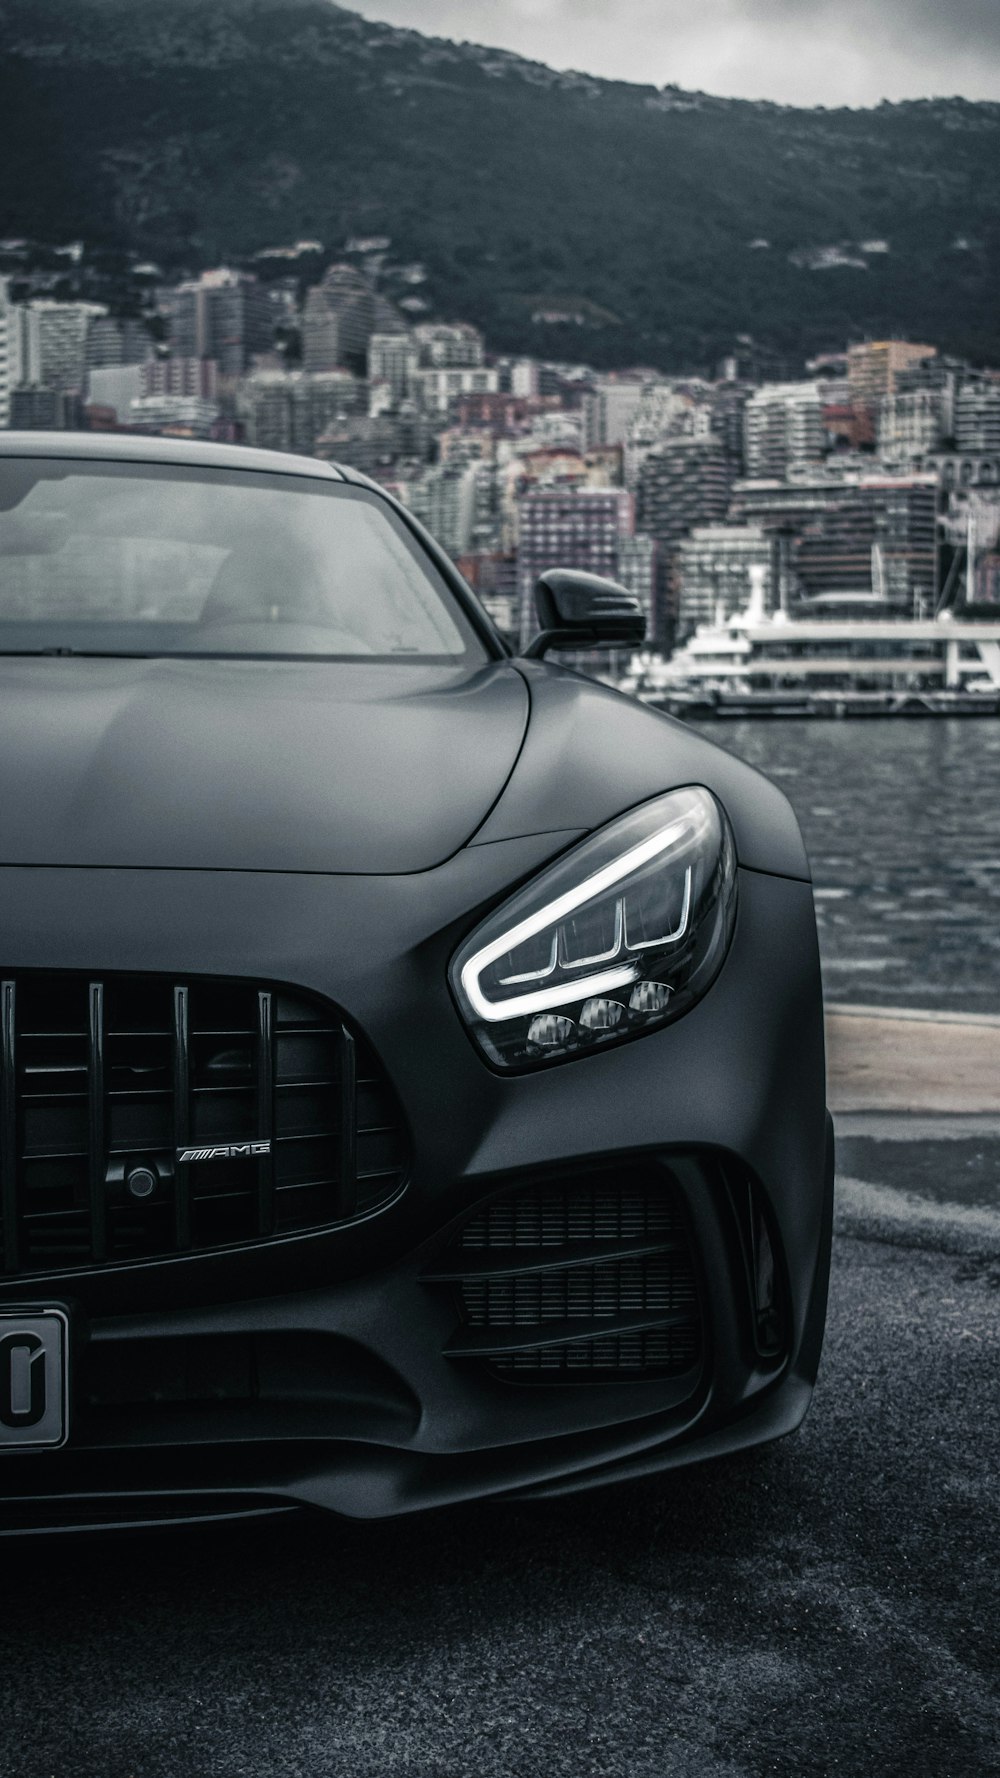 Amg Gtr Pictures | Download Free Images on Unsplash